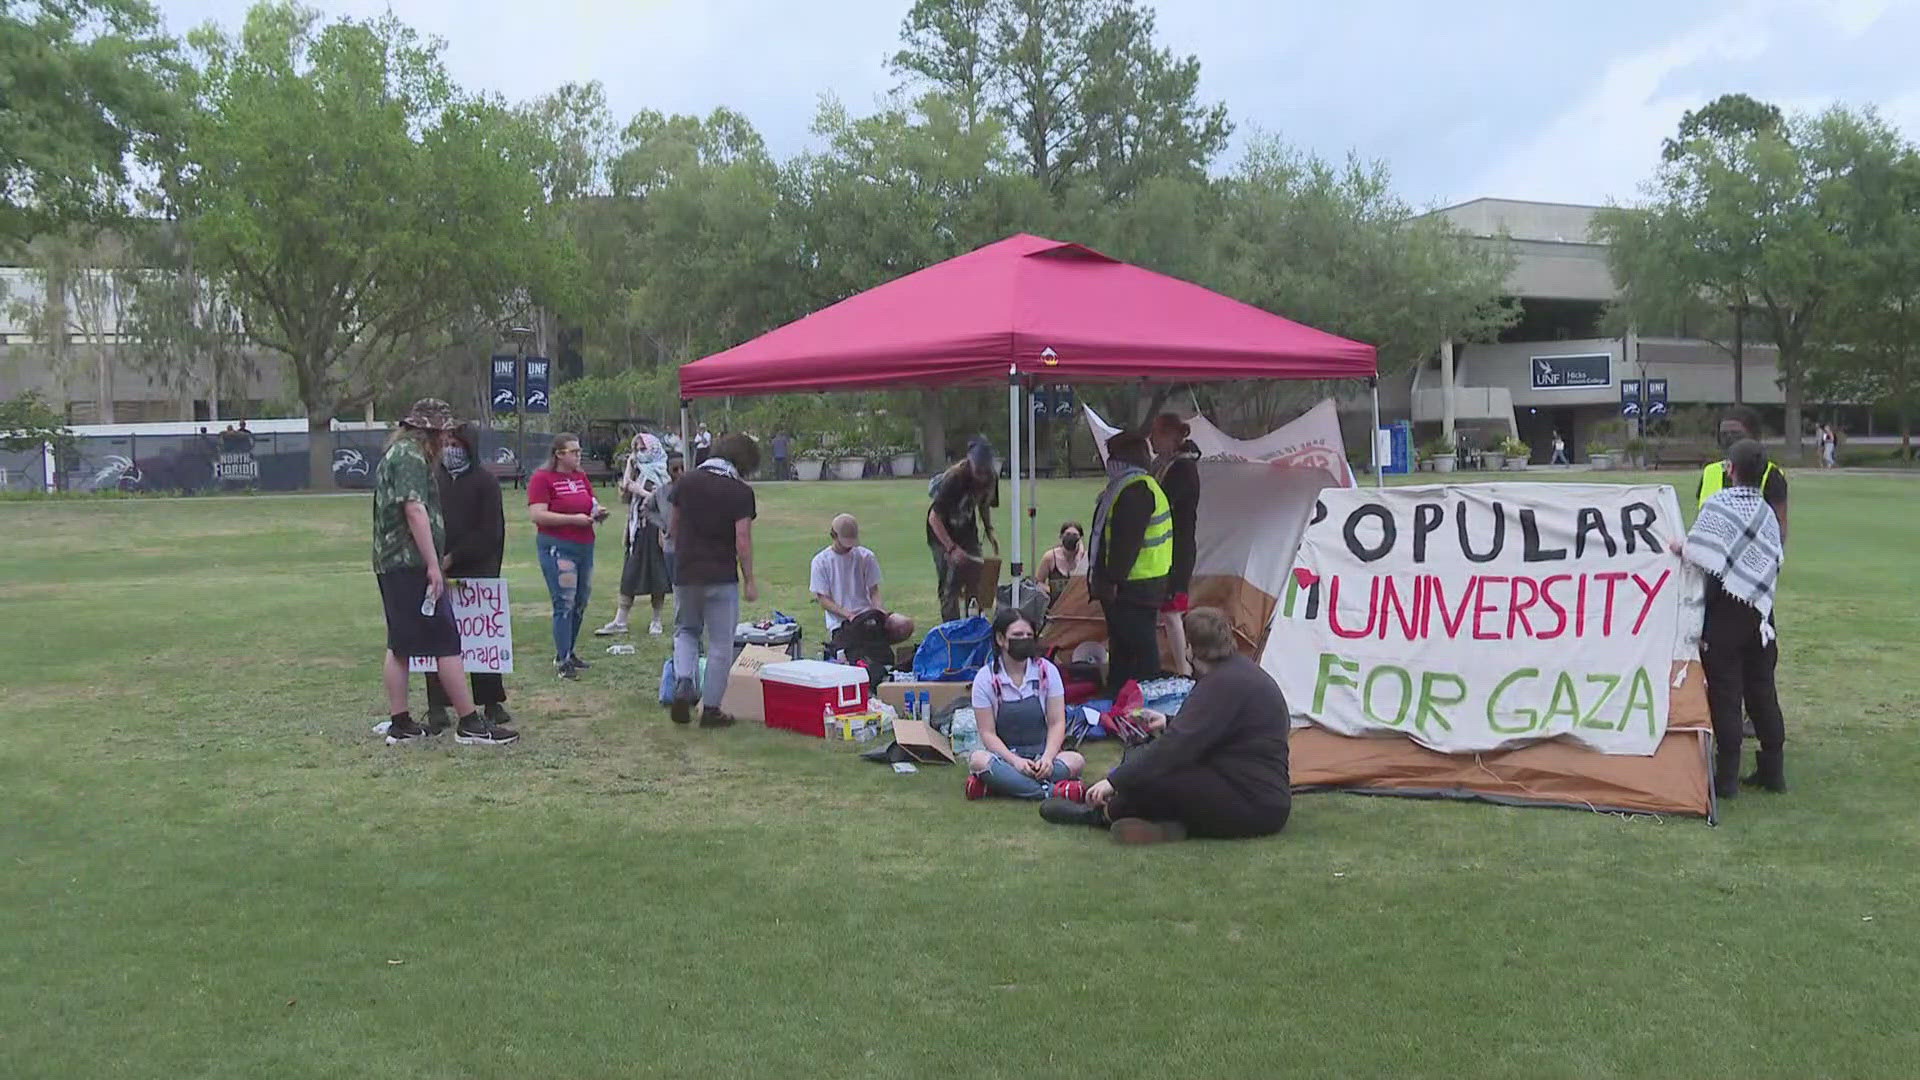 Nearly two hours after students set up an encampment on the UNF Green, campus police gave the group 30 minutes to take down tents, threatening suspension and arrest.